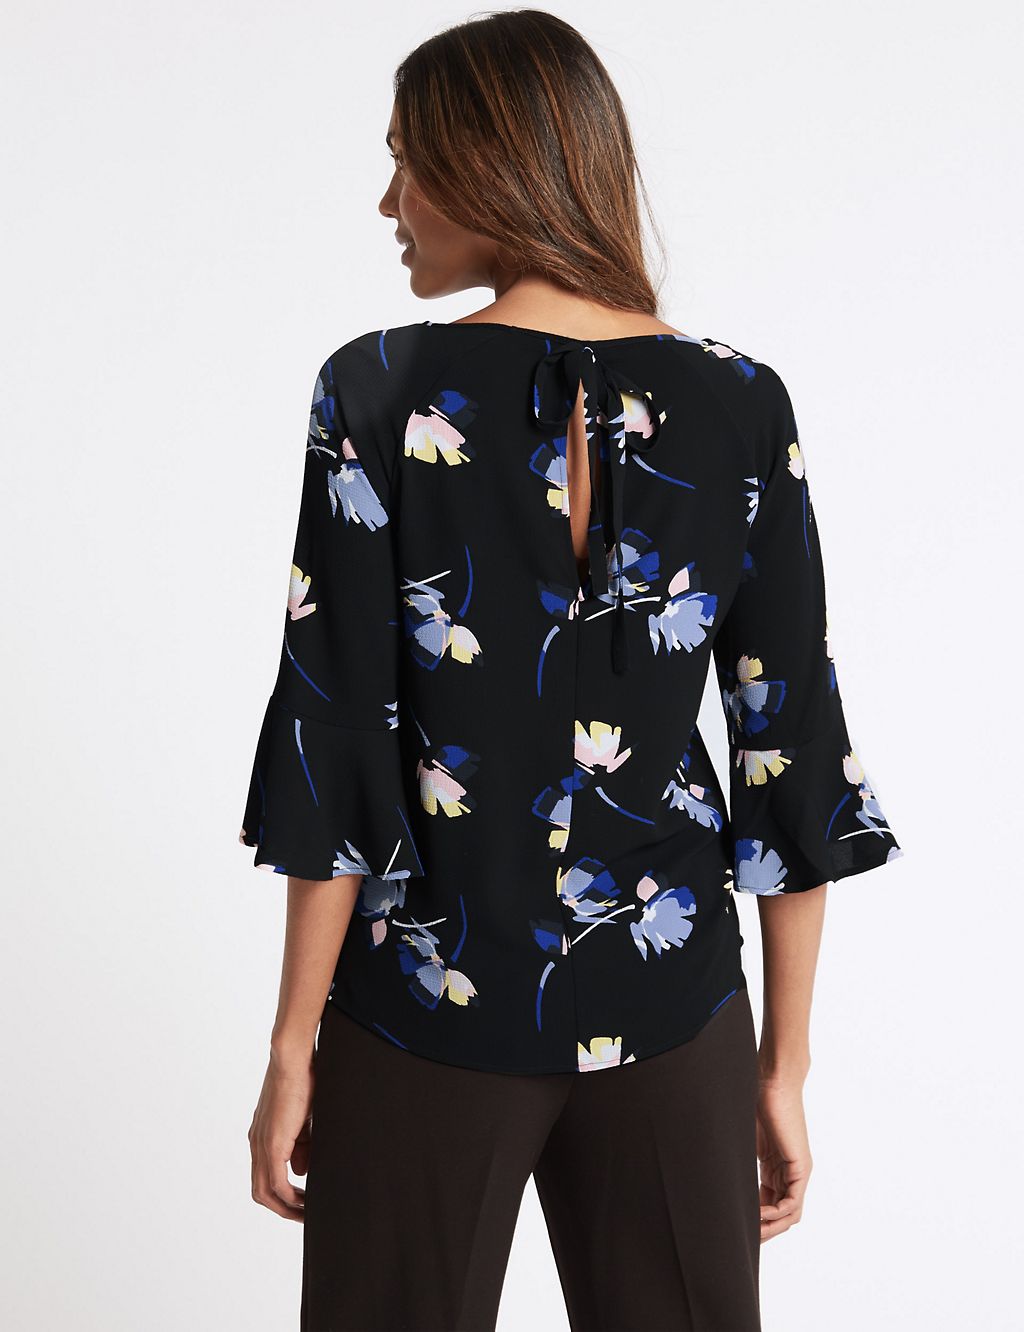 Floral Print Kimono Flared Sleeve Shell Top | M&S Collection | M&S